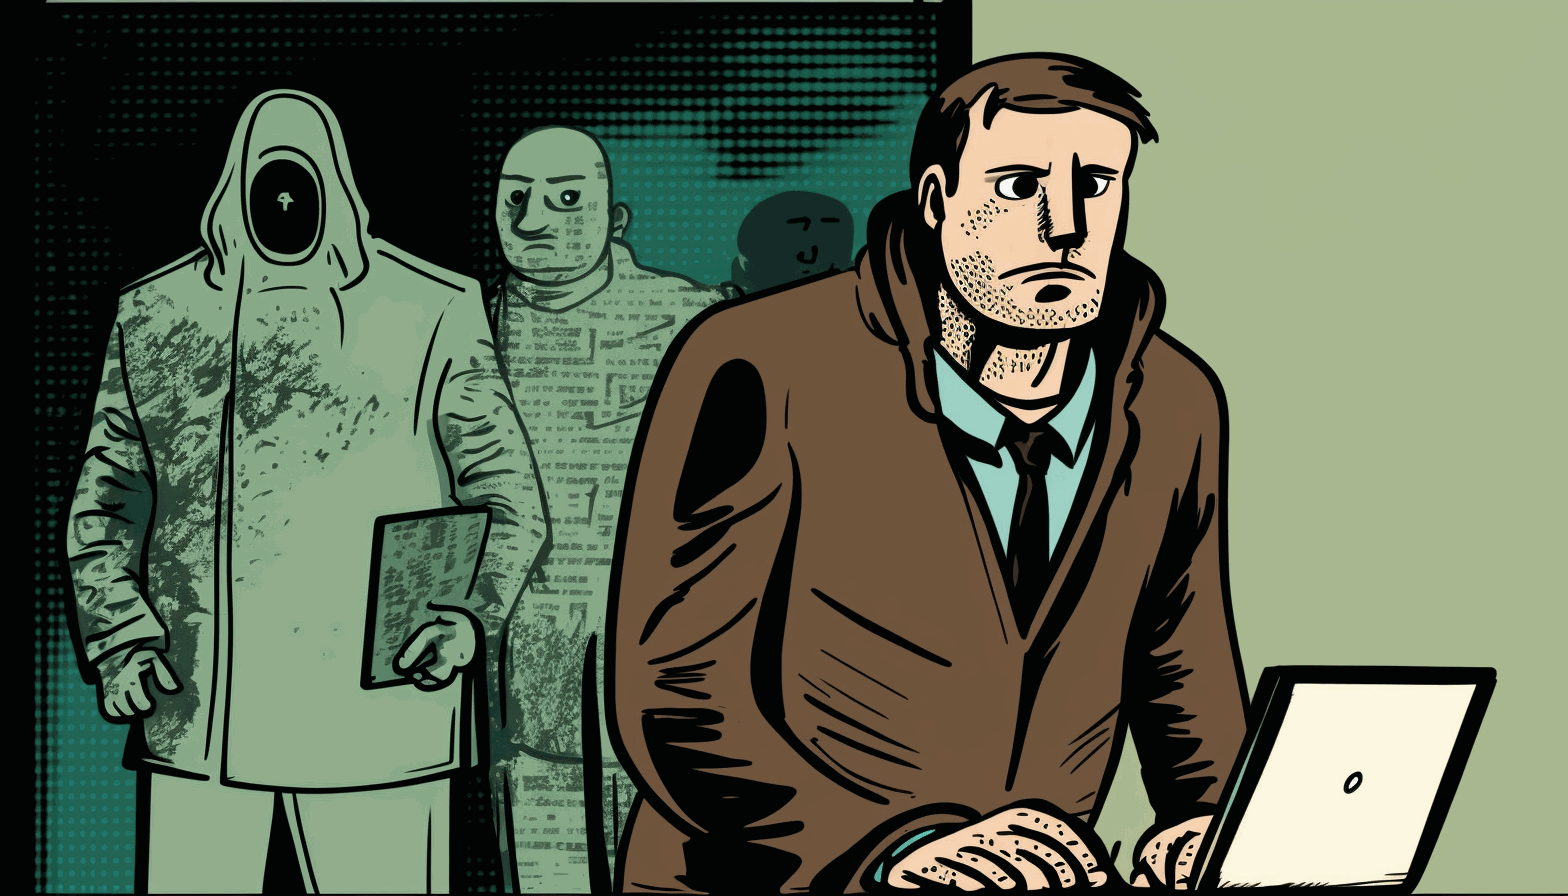 A cartoon image of a person standing in front of a computer or phone with a concerned expression, while a cartoon hacker lurks in the background.